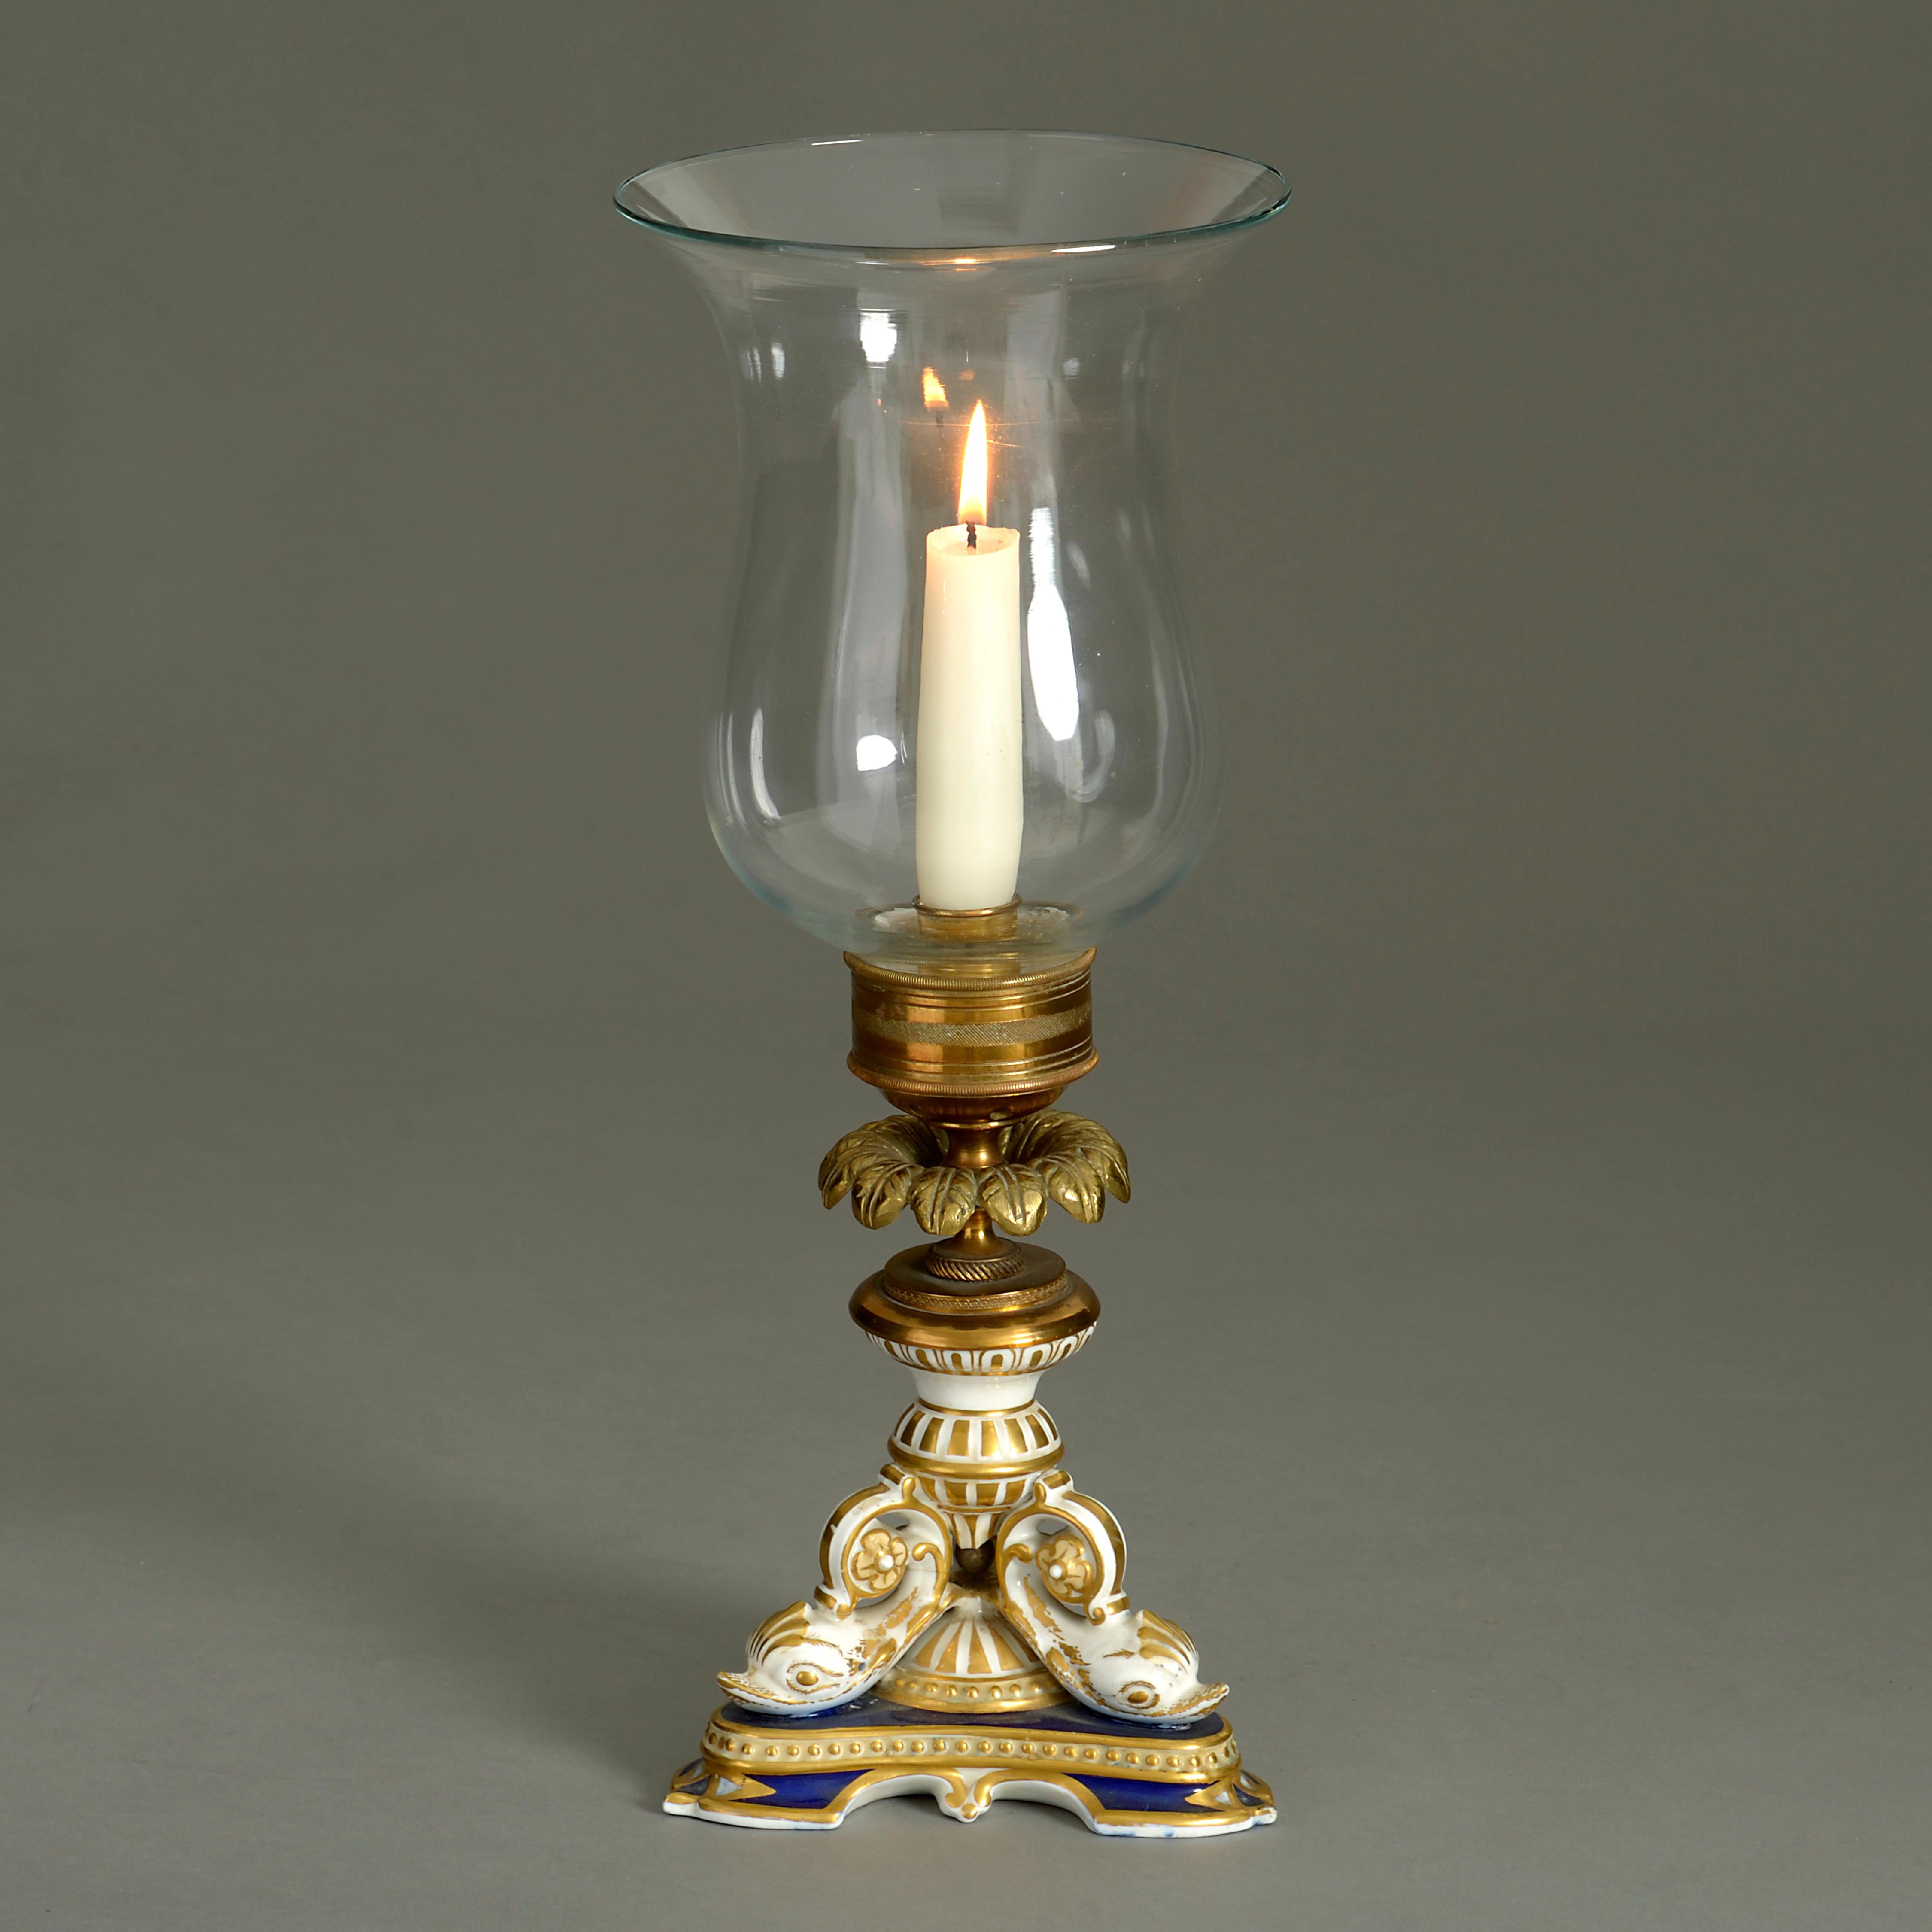 A Regency style storm lantern, the glass shade supported by a porcelain plinth base with supporting dolphins in blue, white and gold glazes. With red glazed factory marks to the underside.